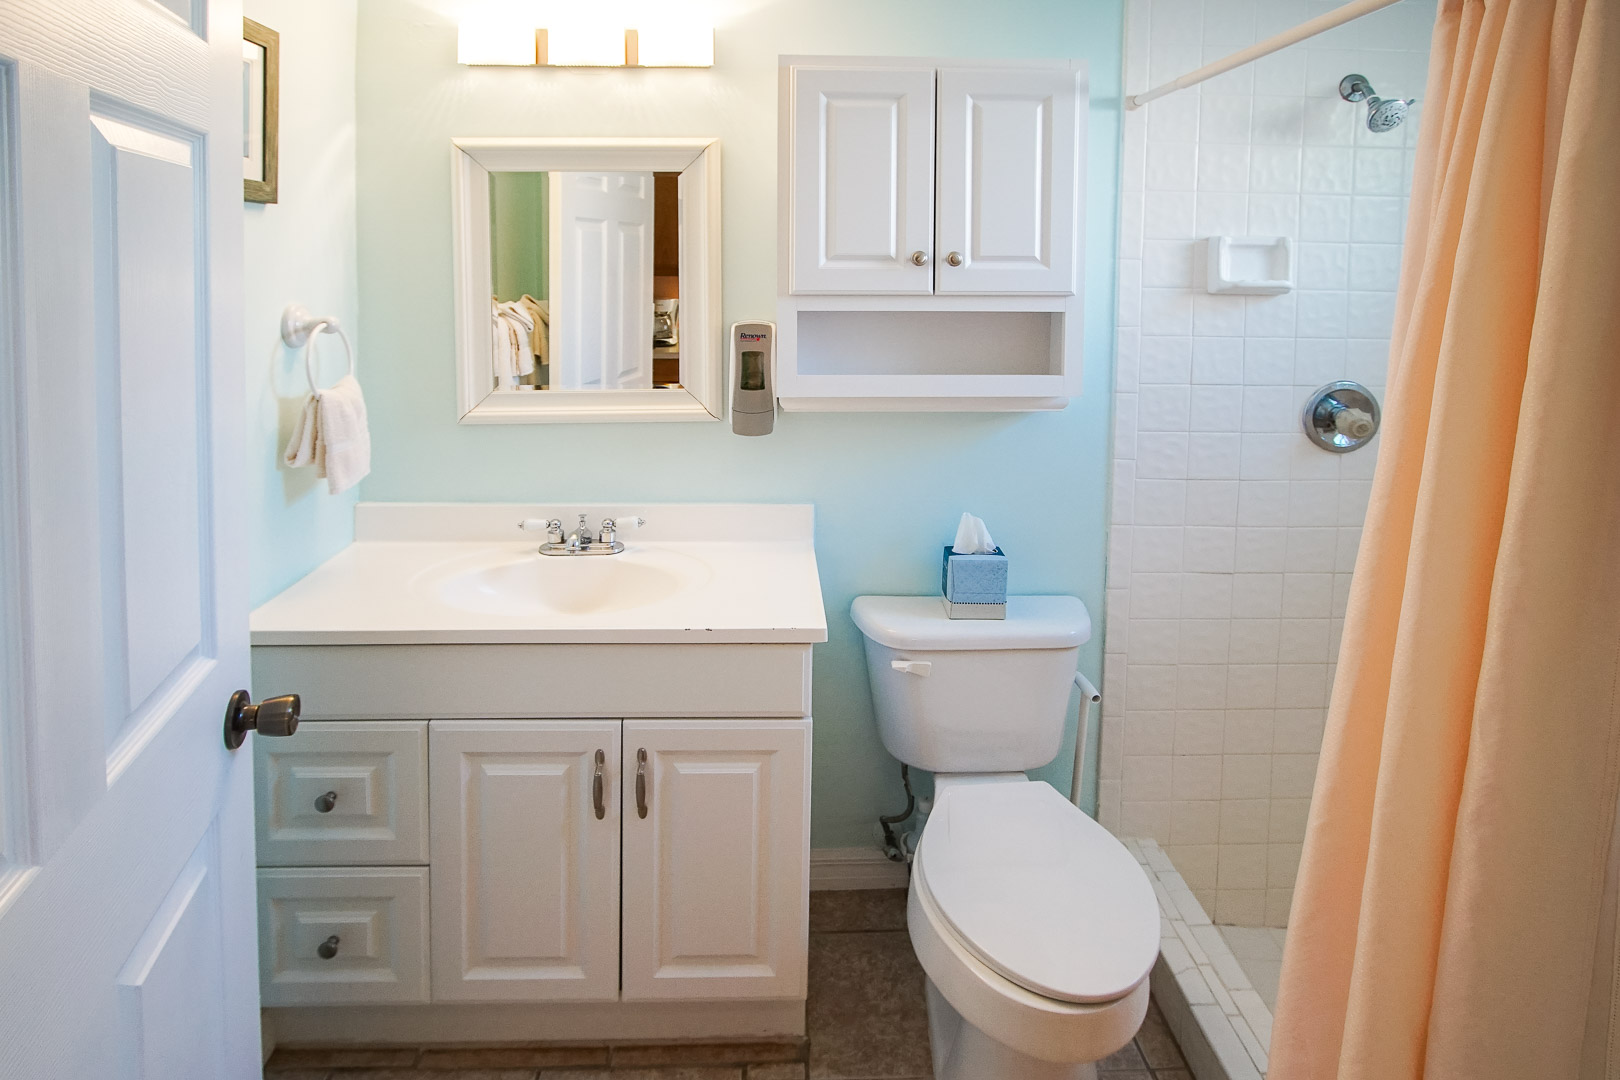 A clean bathroom at VRI's Sand Dune Shores in Florida.